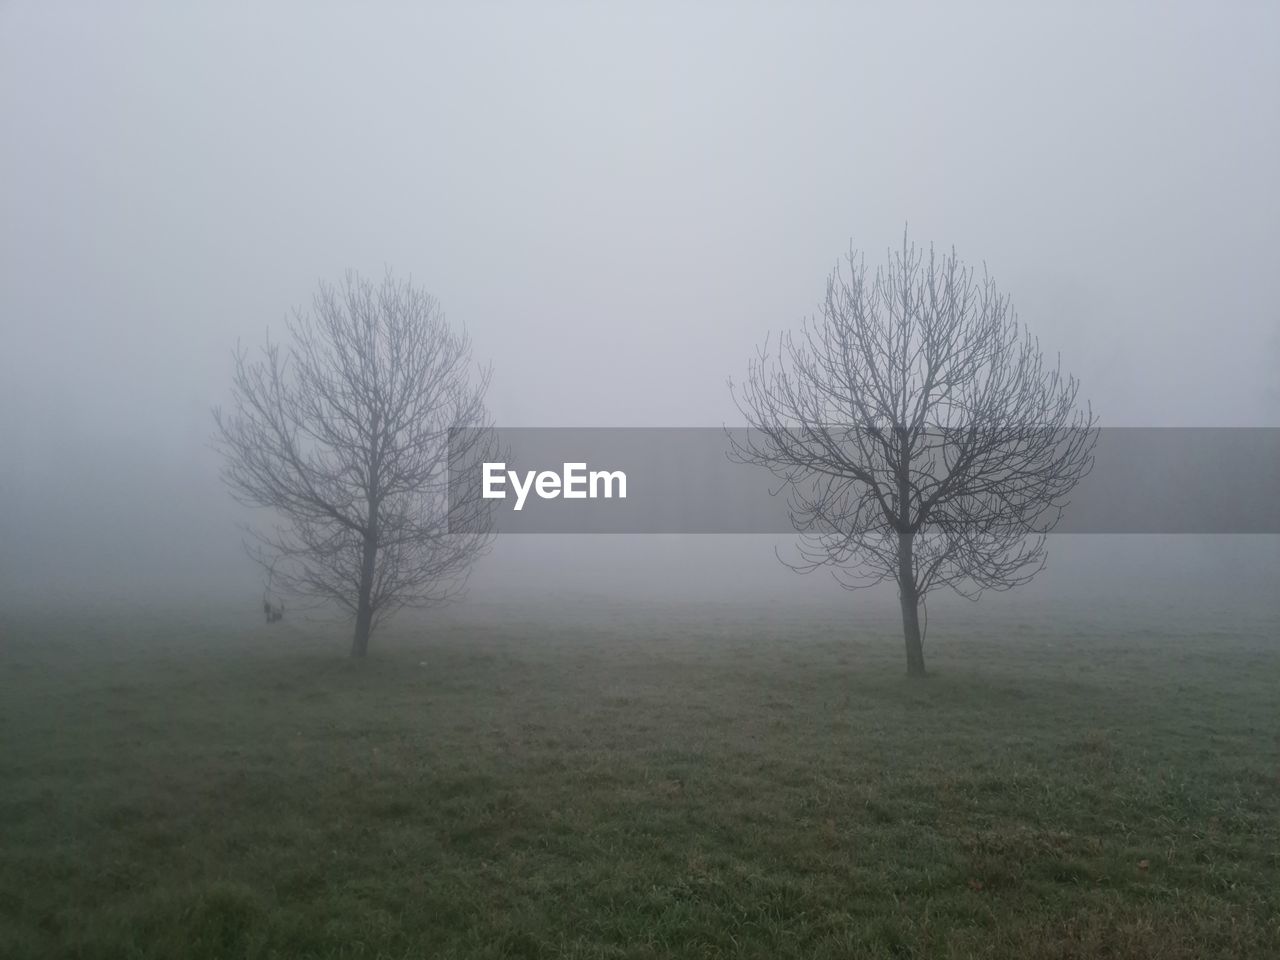 mist, fog, tree, plant, morning, bare tree, environment, nature, landscape, haze, land, tranquility, grass, beauty in nature, no people, dawn, sky, winter, field, tranquil scene, grey, plain, scenics - nature, non-urban scene, outdoors, cold temperature, branch, rural scene, mystery